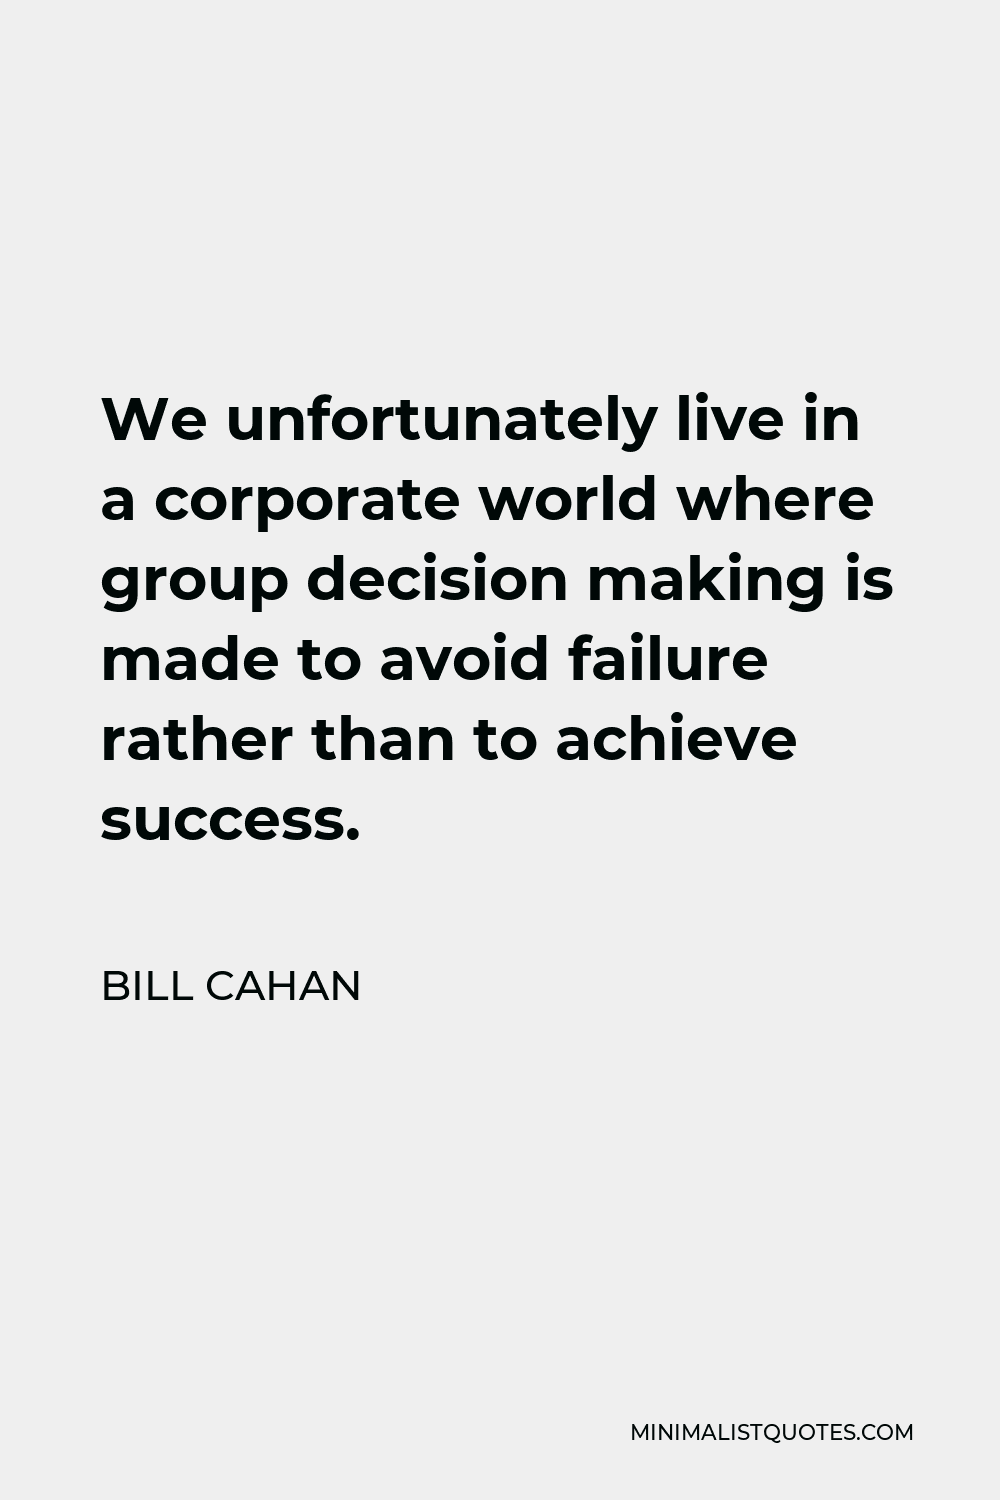 Bill Cahan Quote - We unfortunately live in a corporate world where group decision making is made to avoid failure rather than to achieve success.